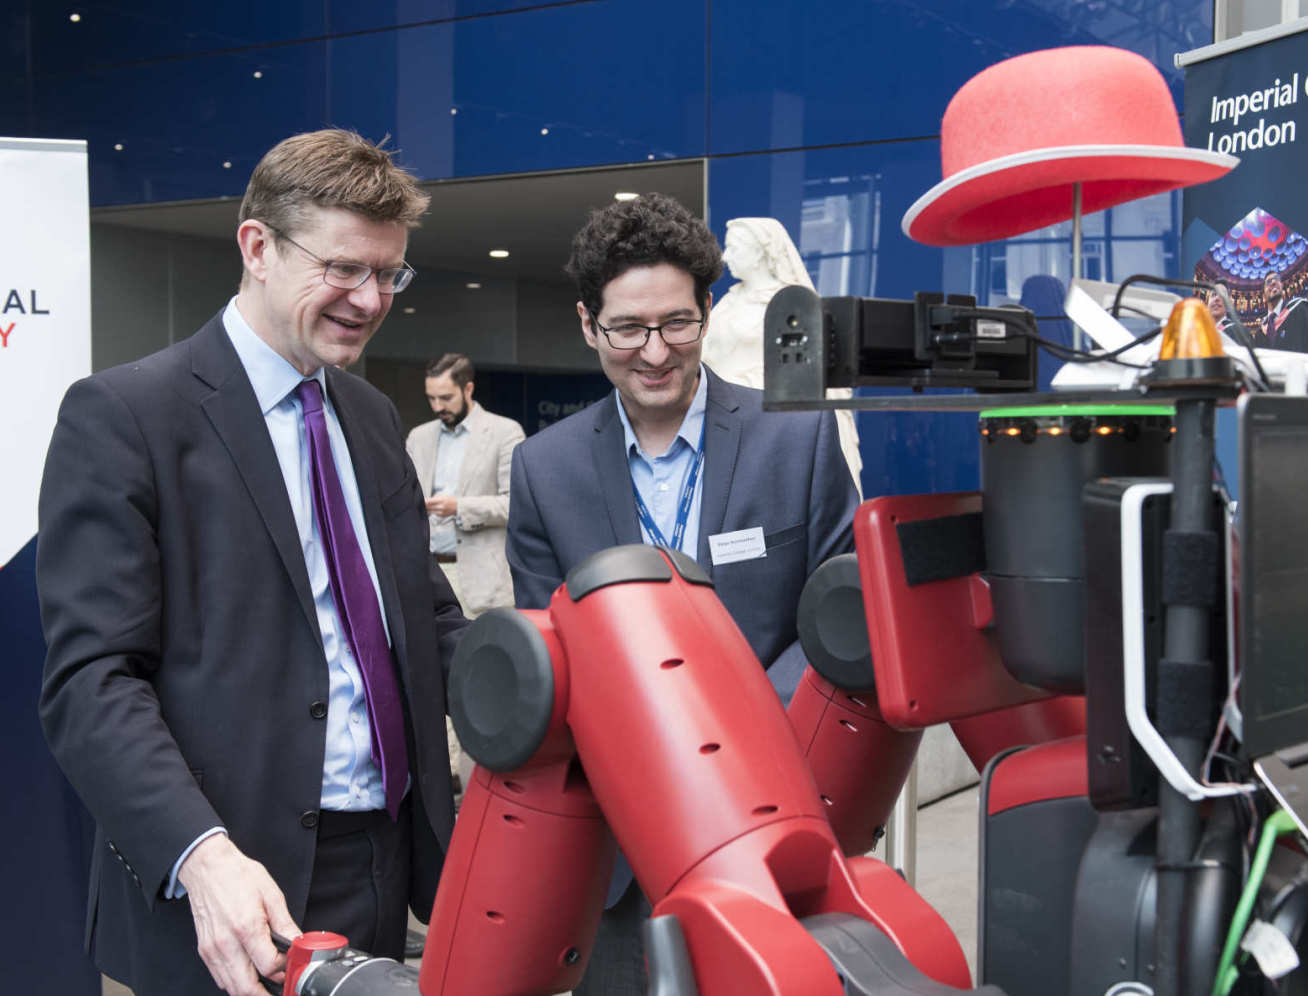 Business Secretary Greg Clark interacting with robot named Robot DE NIRO at Imperial.